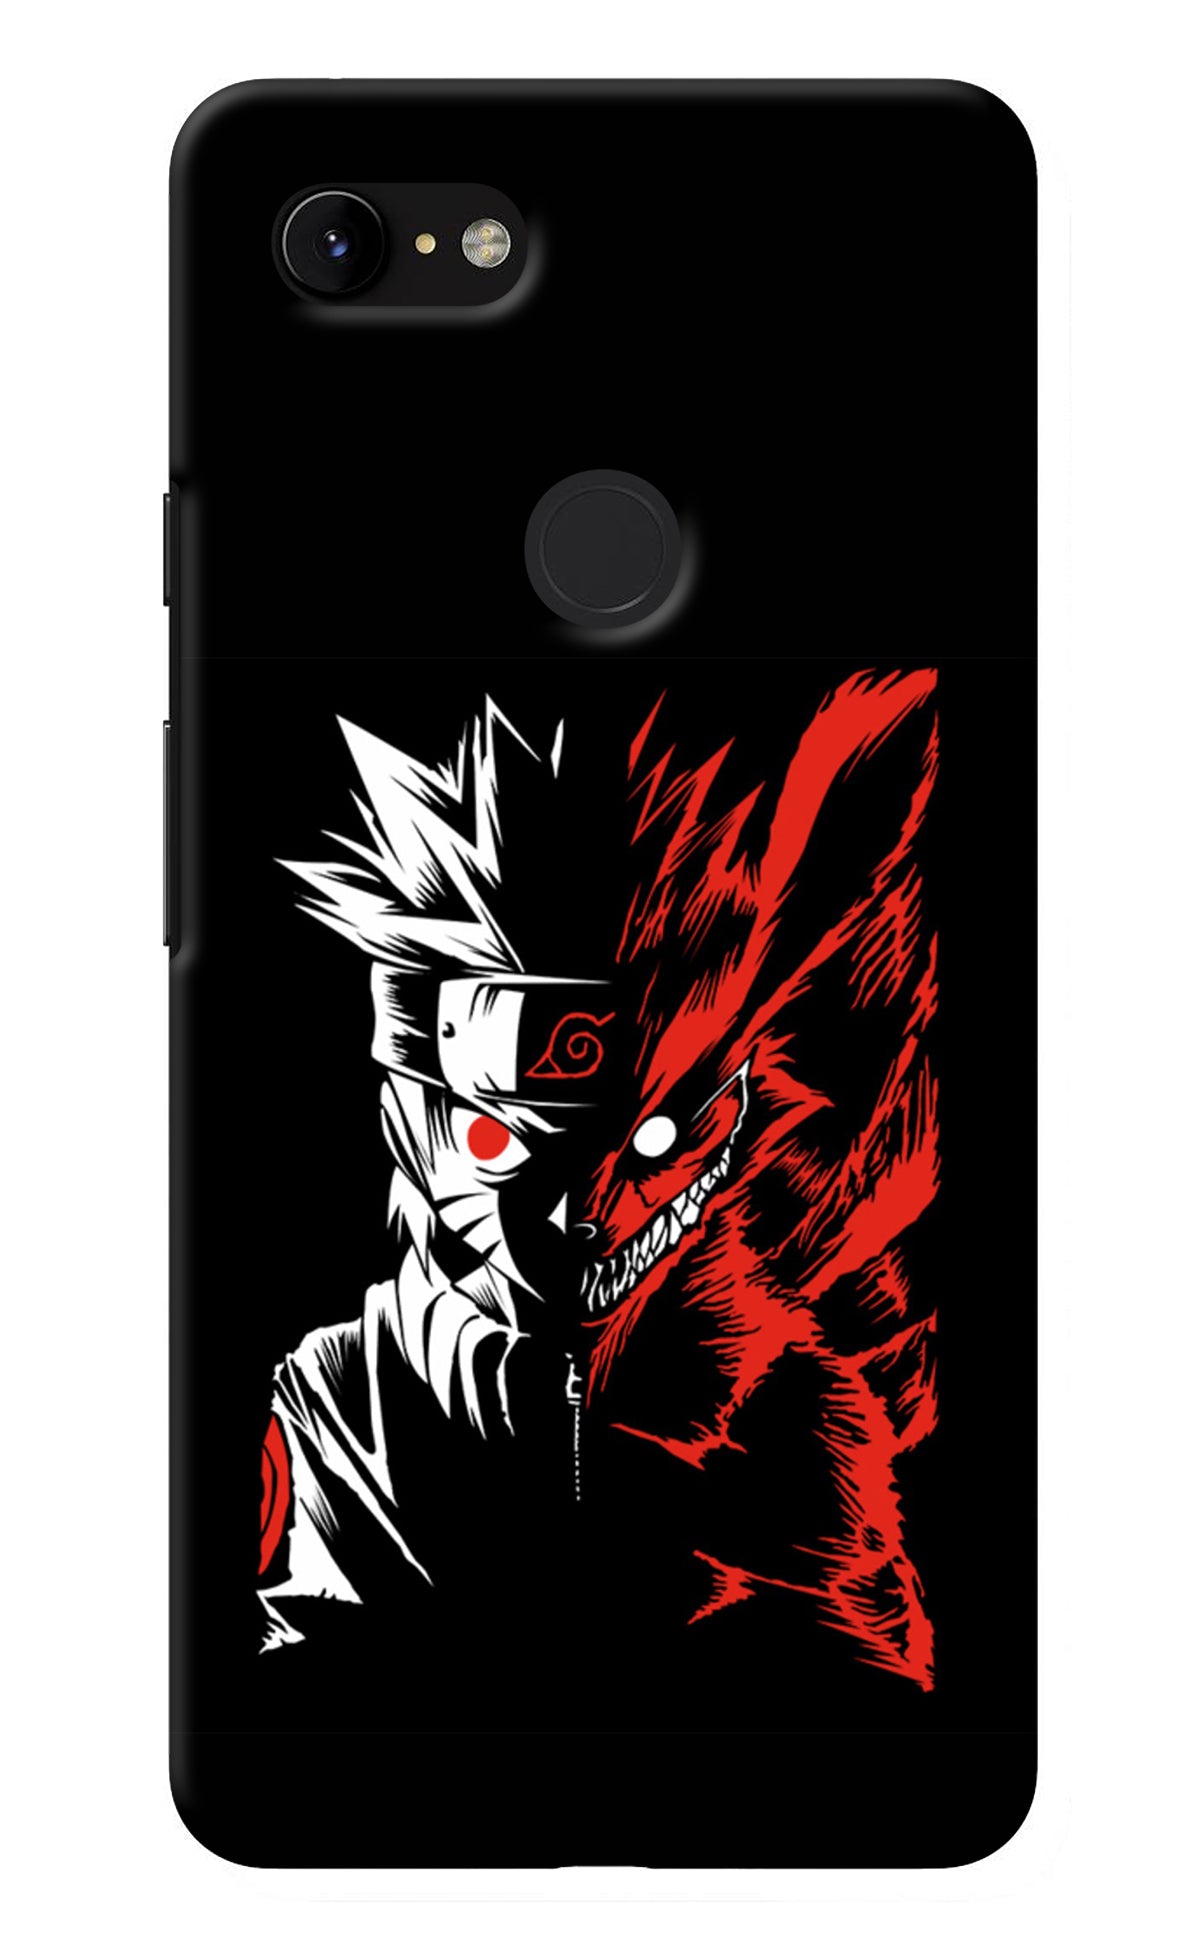 Naruto Two Face Google Pixel 3 XL Back Cover